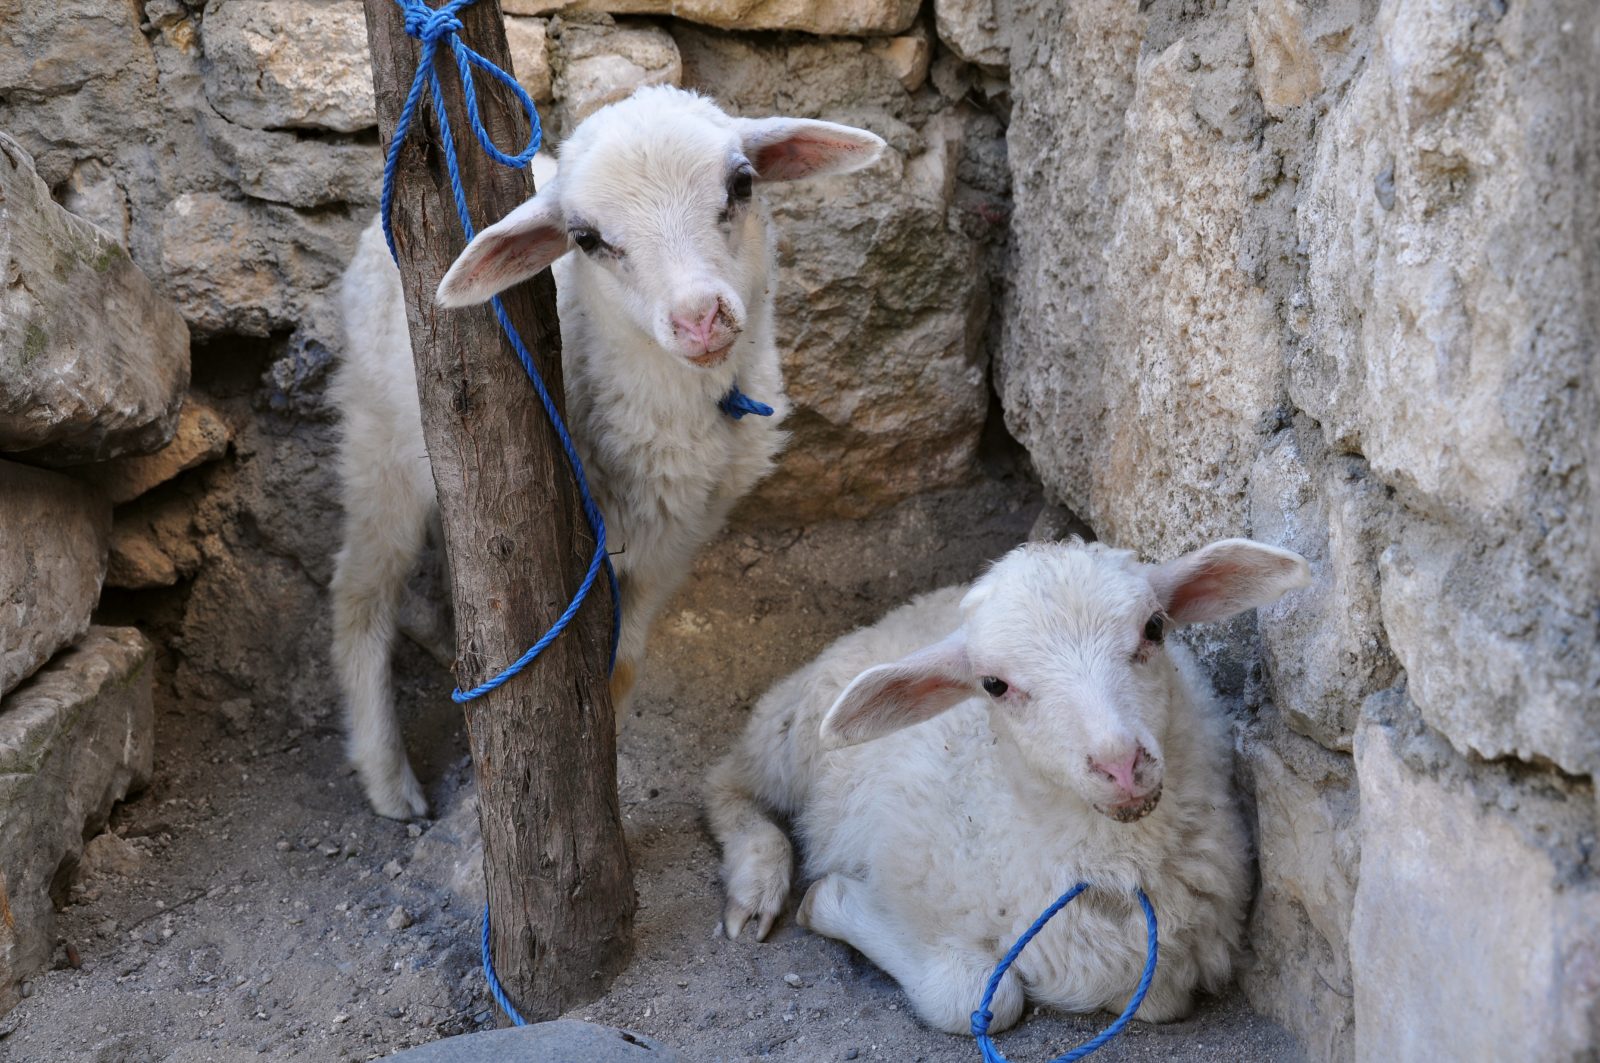 Two white sheep (lambs) tied to a pole near a stone wall waiting for slaughter